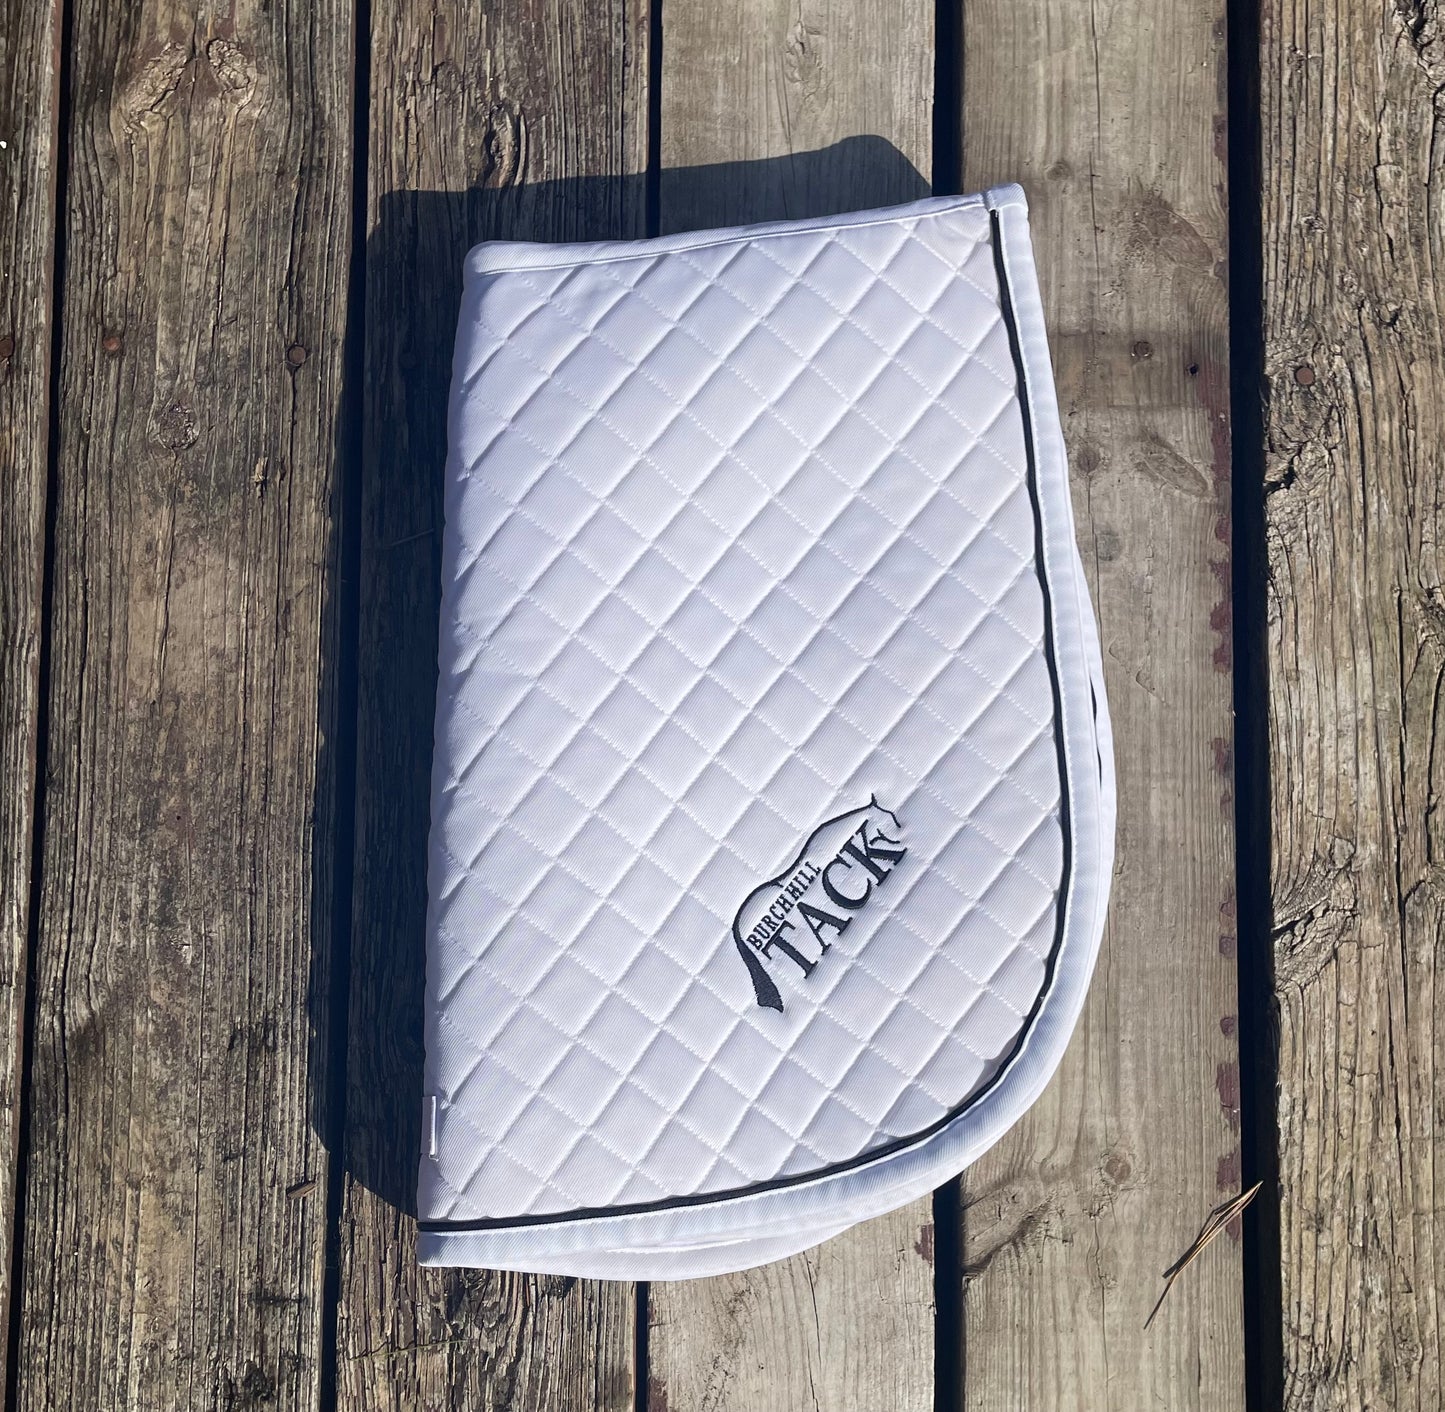 Burch Hill Tack Embroidered saddle pad